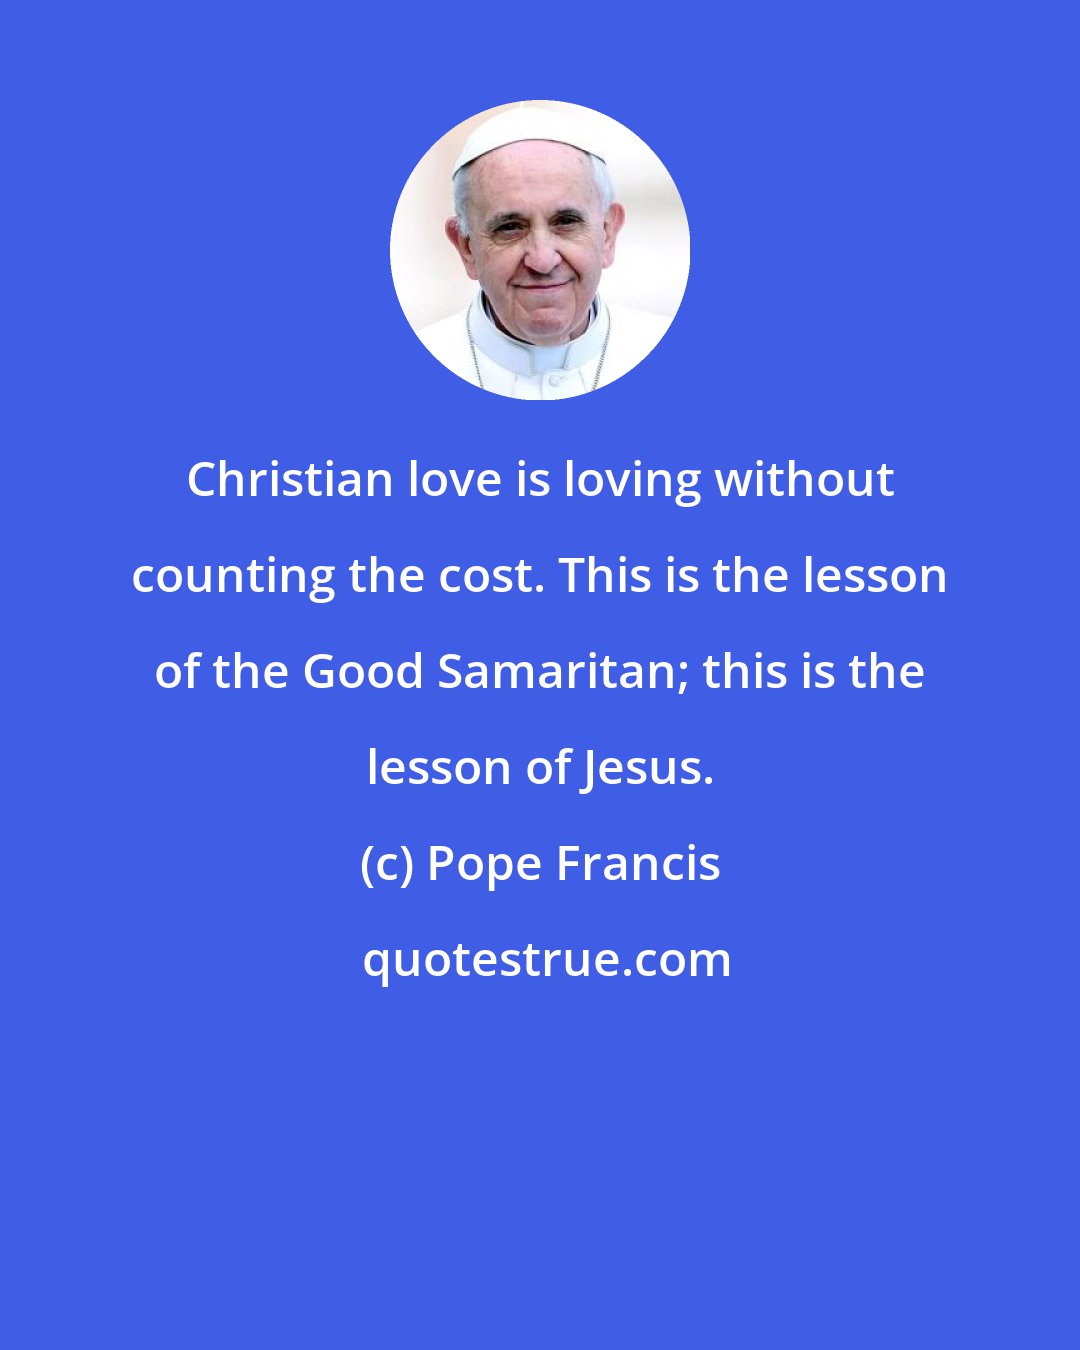 Pope Francis: Christian love is loving without counting the cost. This is the lesson of the Good Samaritan; this is the lesson of Jesus.